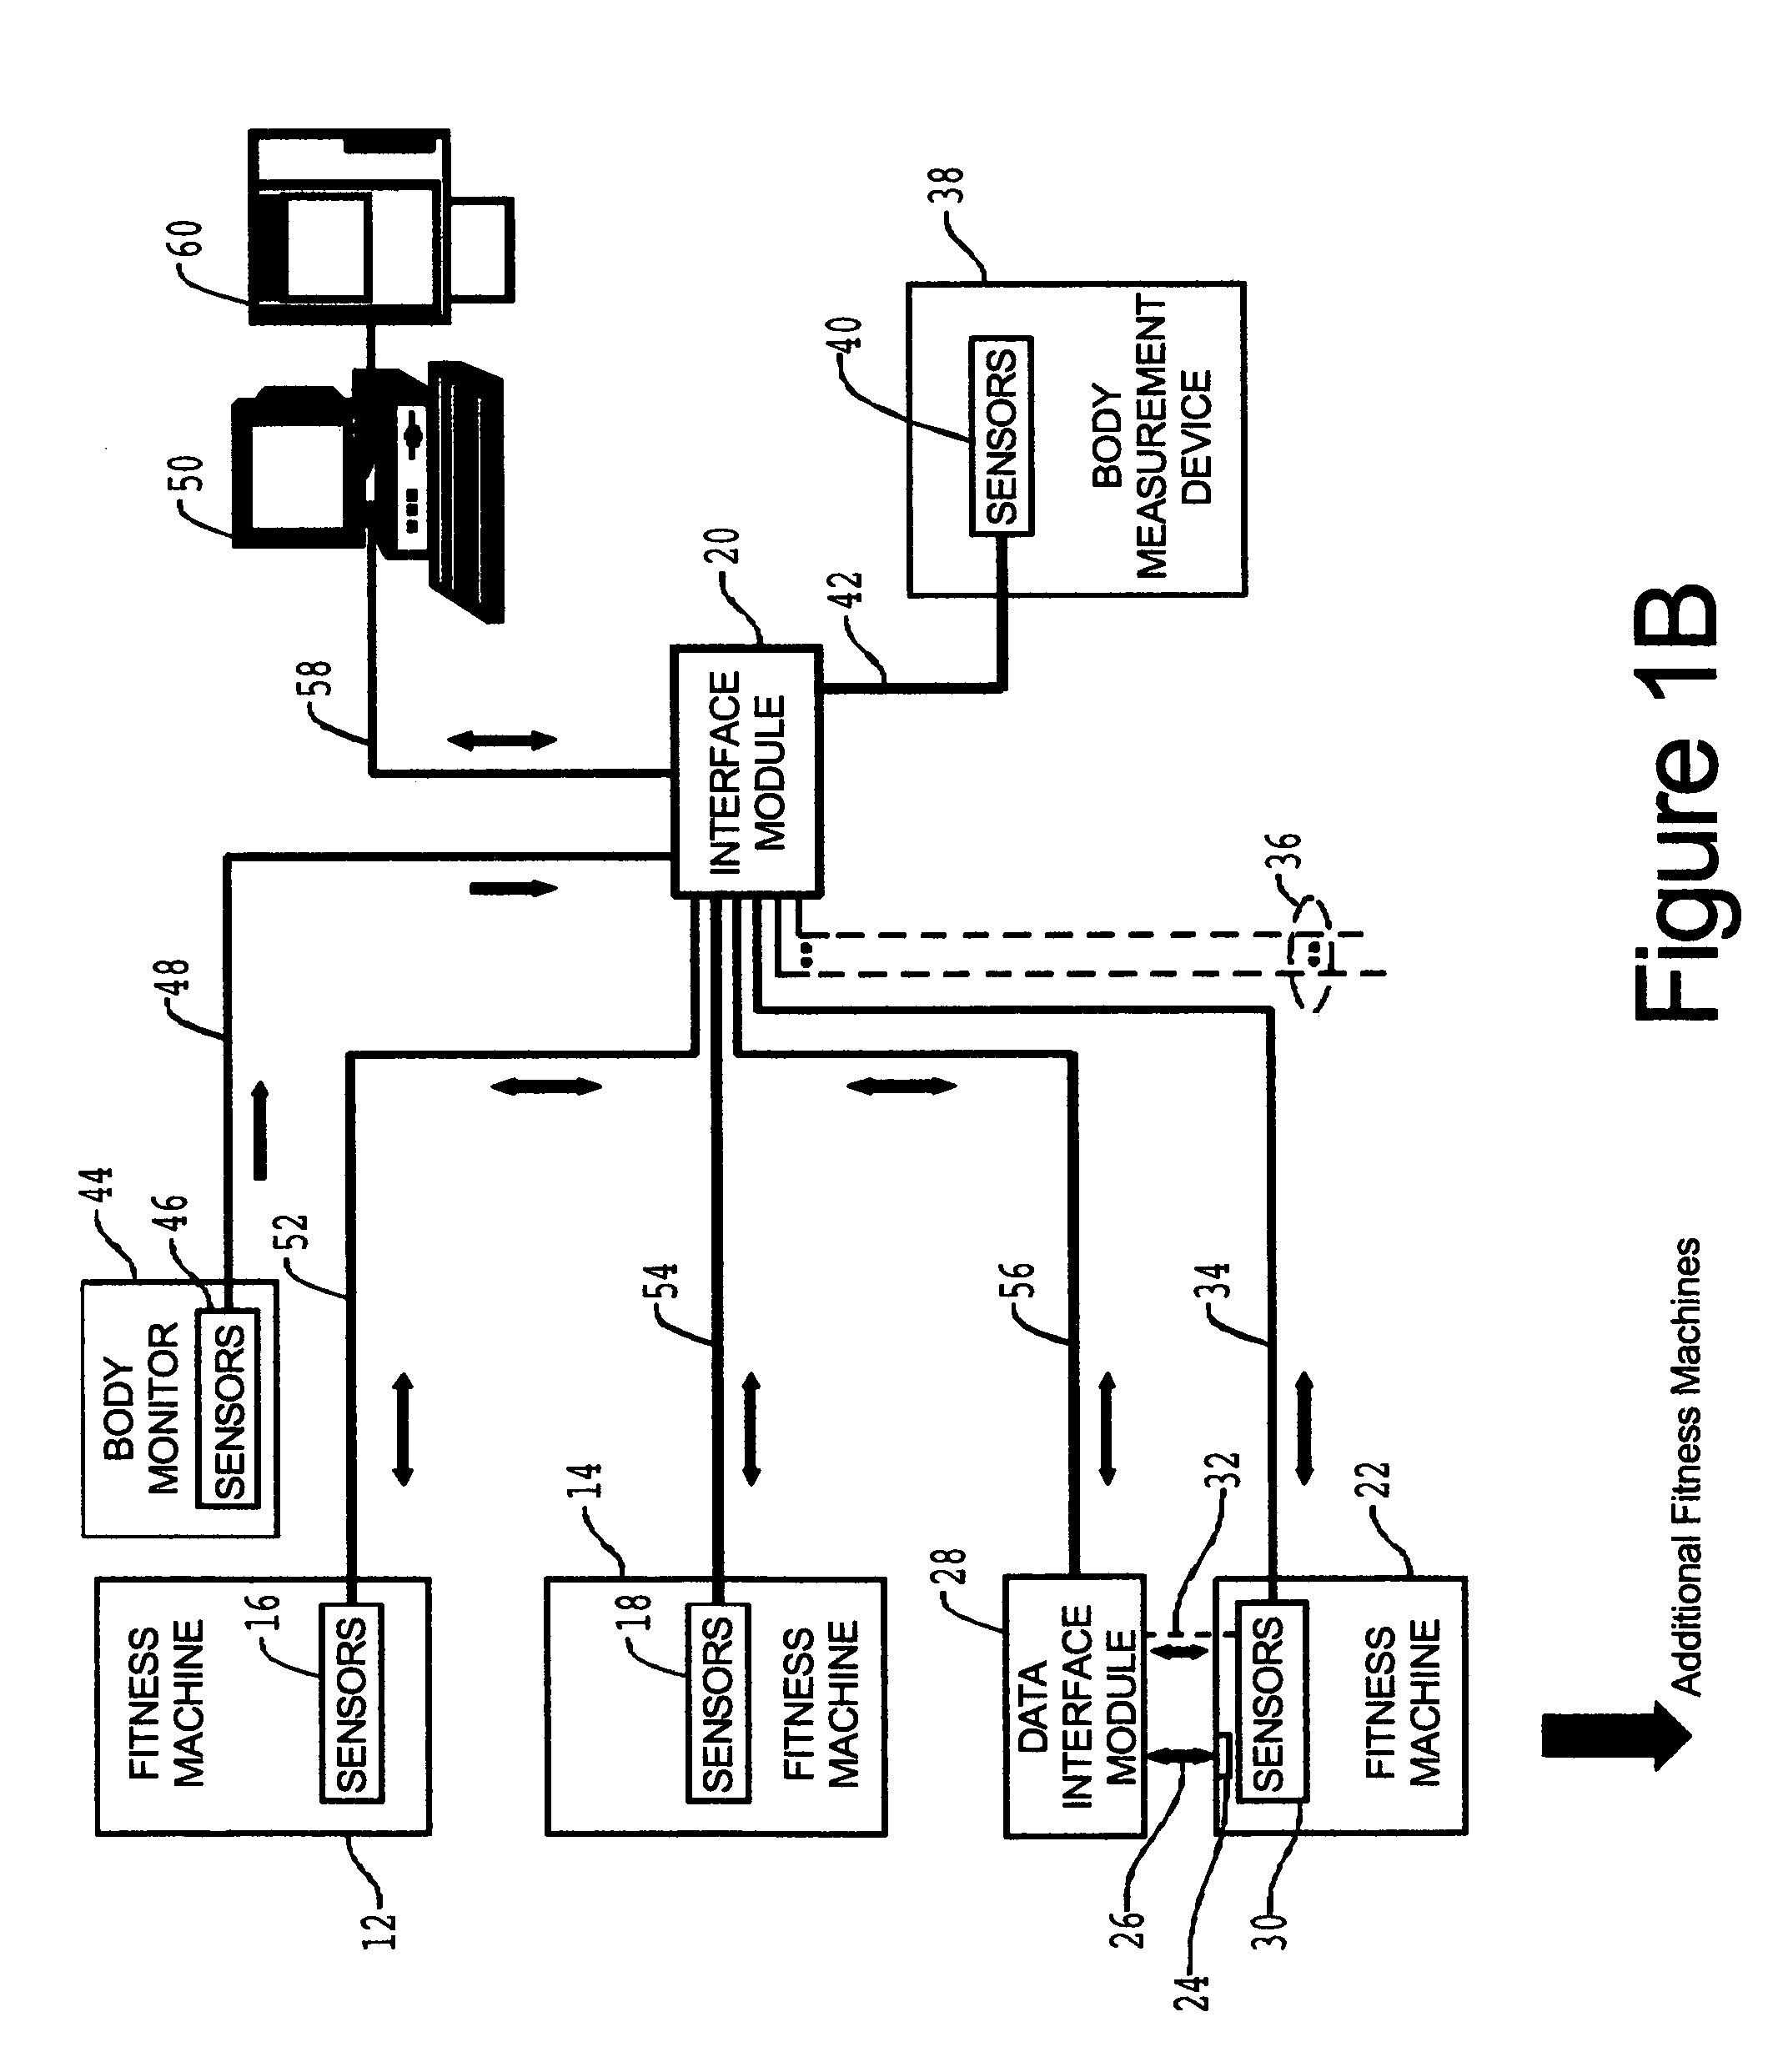 Electronic data gathering and processing for fitness machines